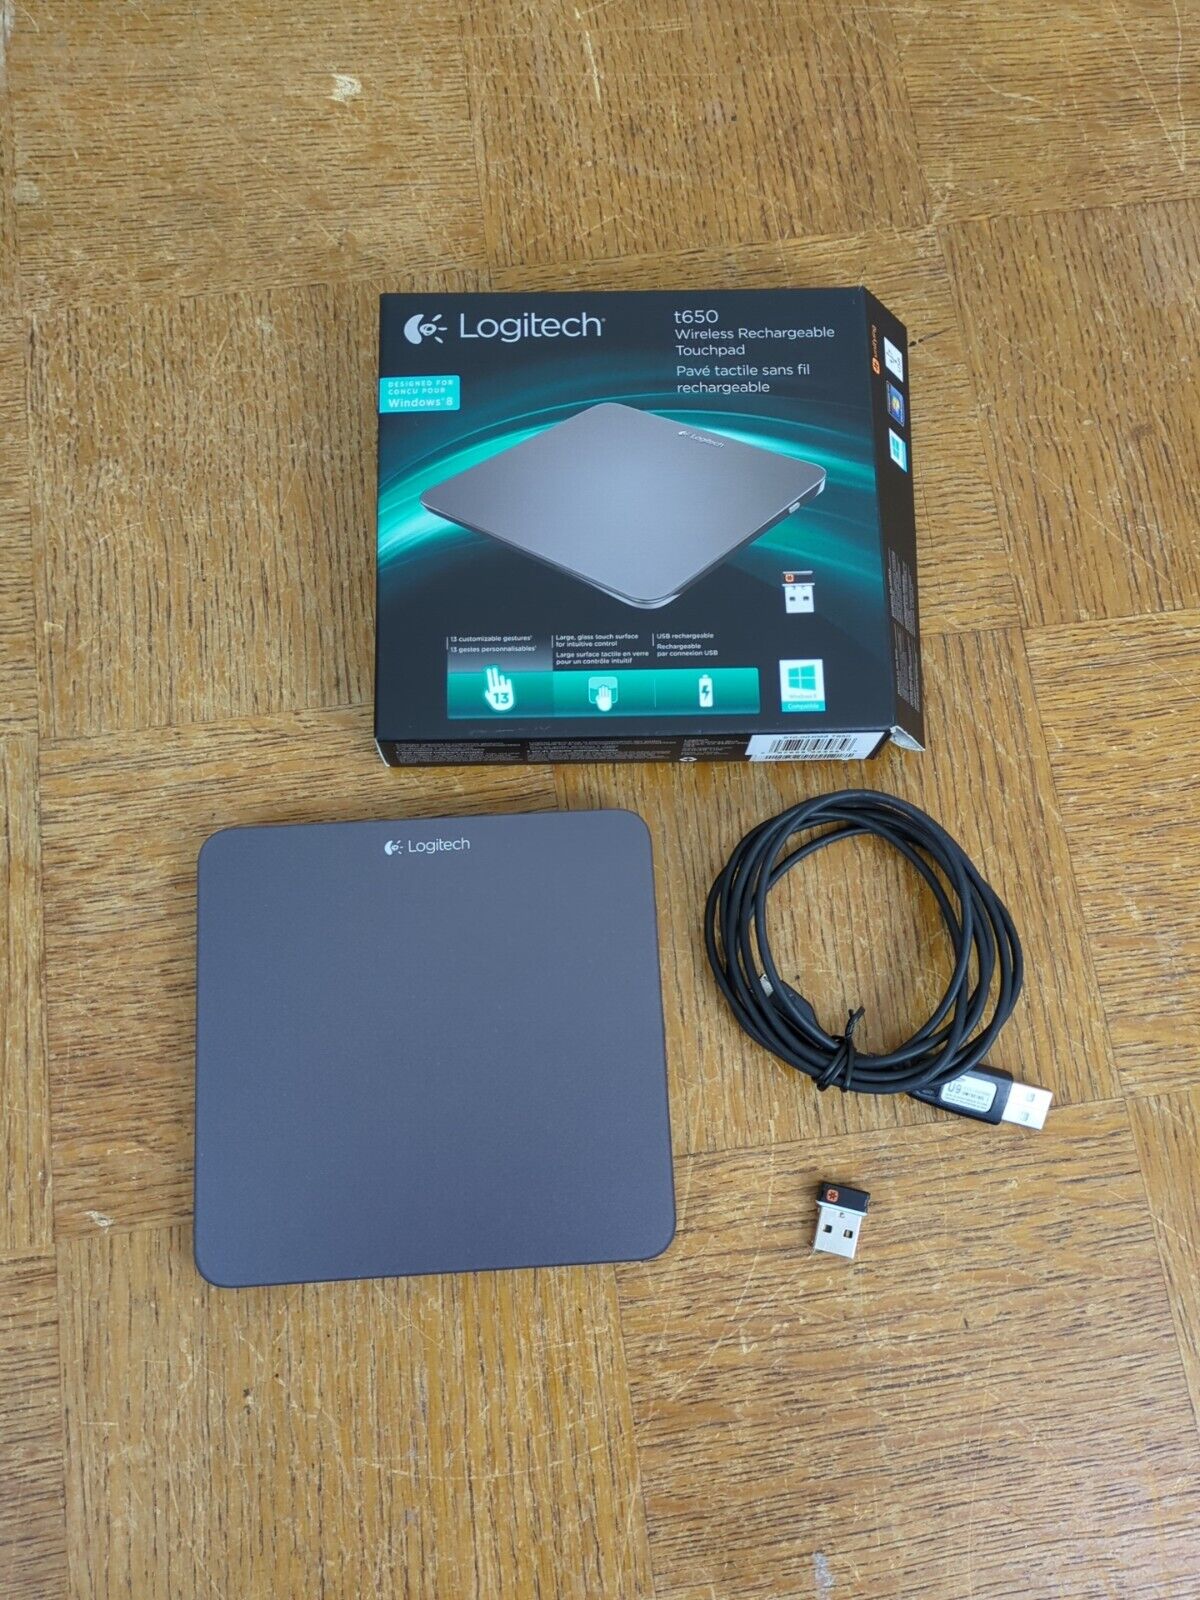 LOGITECH T650 Wireless Rechargeable Touchpad w/ Unifying Receiver & USB - In Box